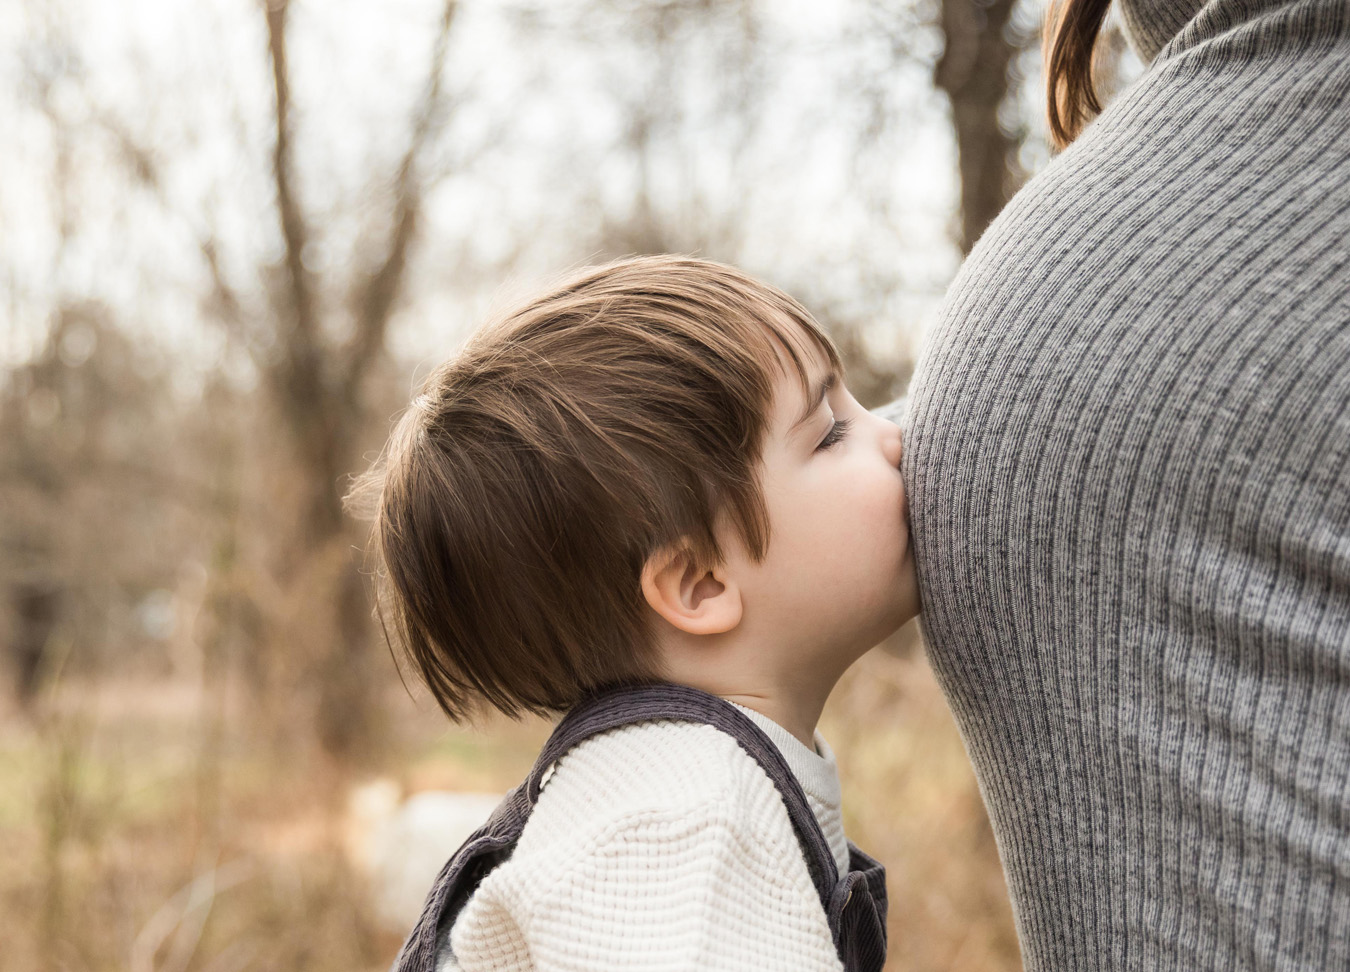 Best doulas in Northern Virginia series featuring a toddler with brown hair, a white sweatshirt and brown overalls kissing his mother's baby belly